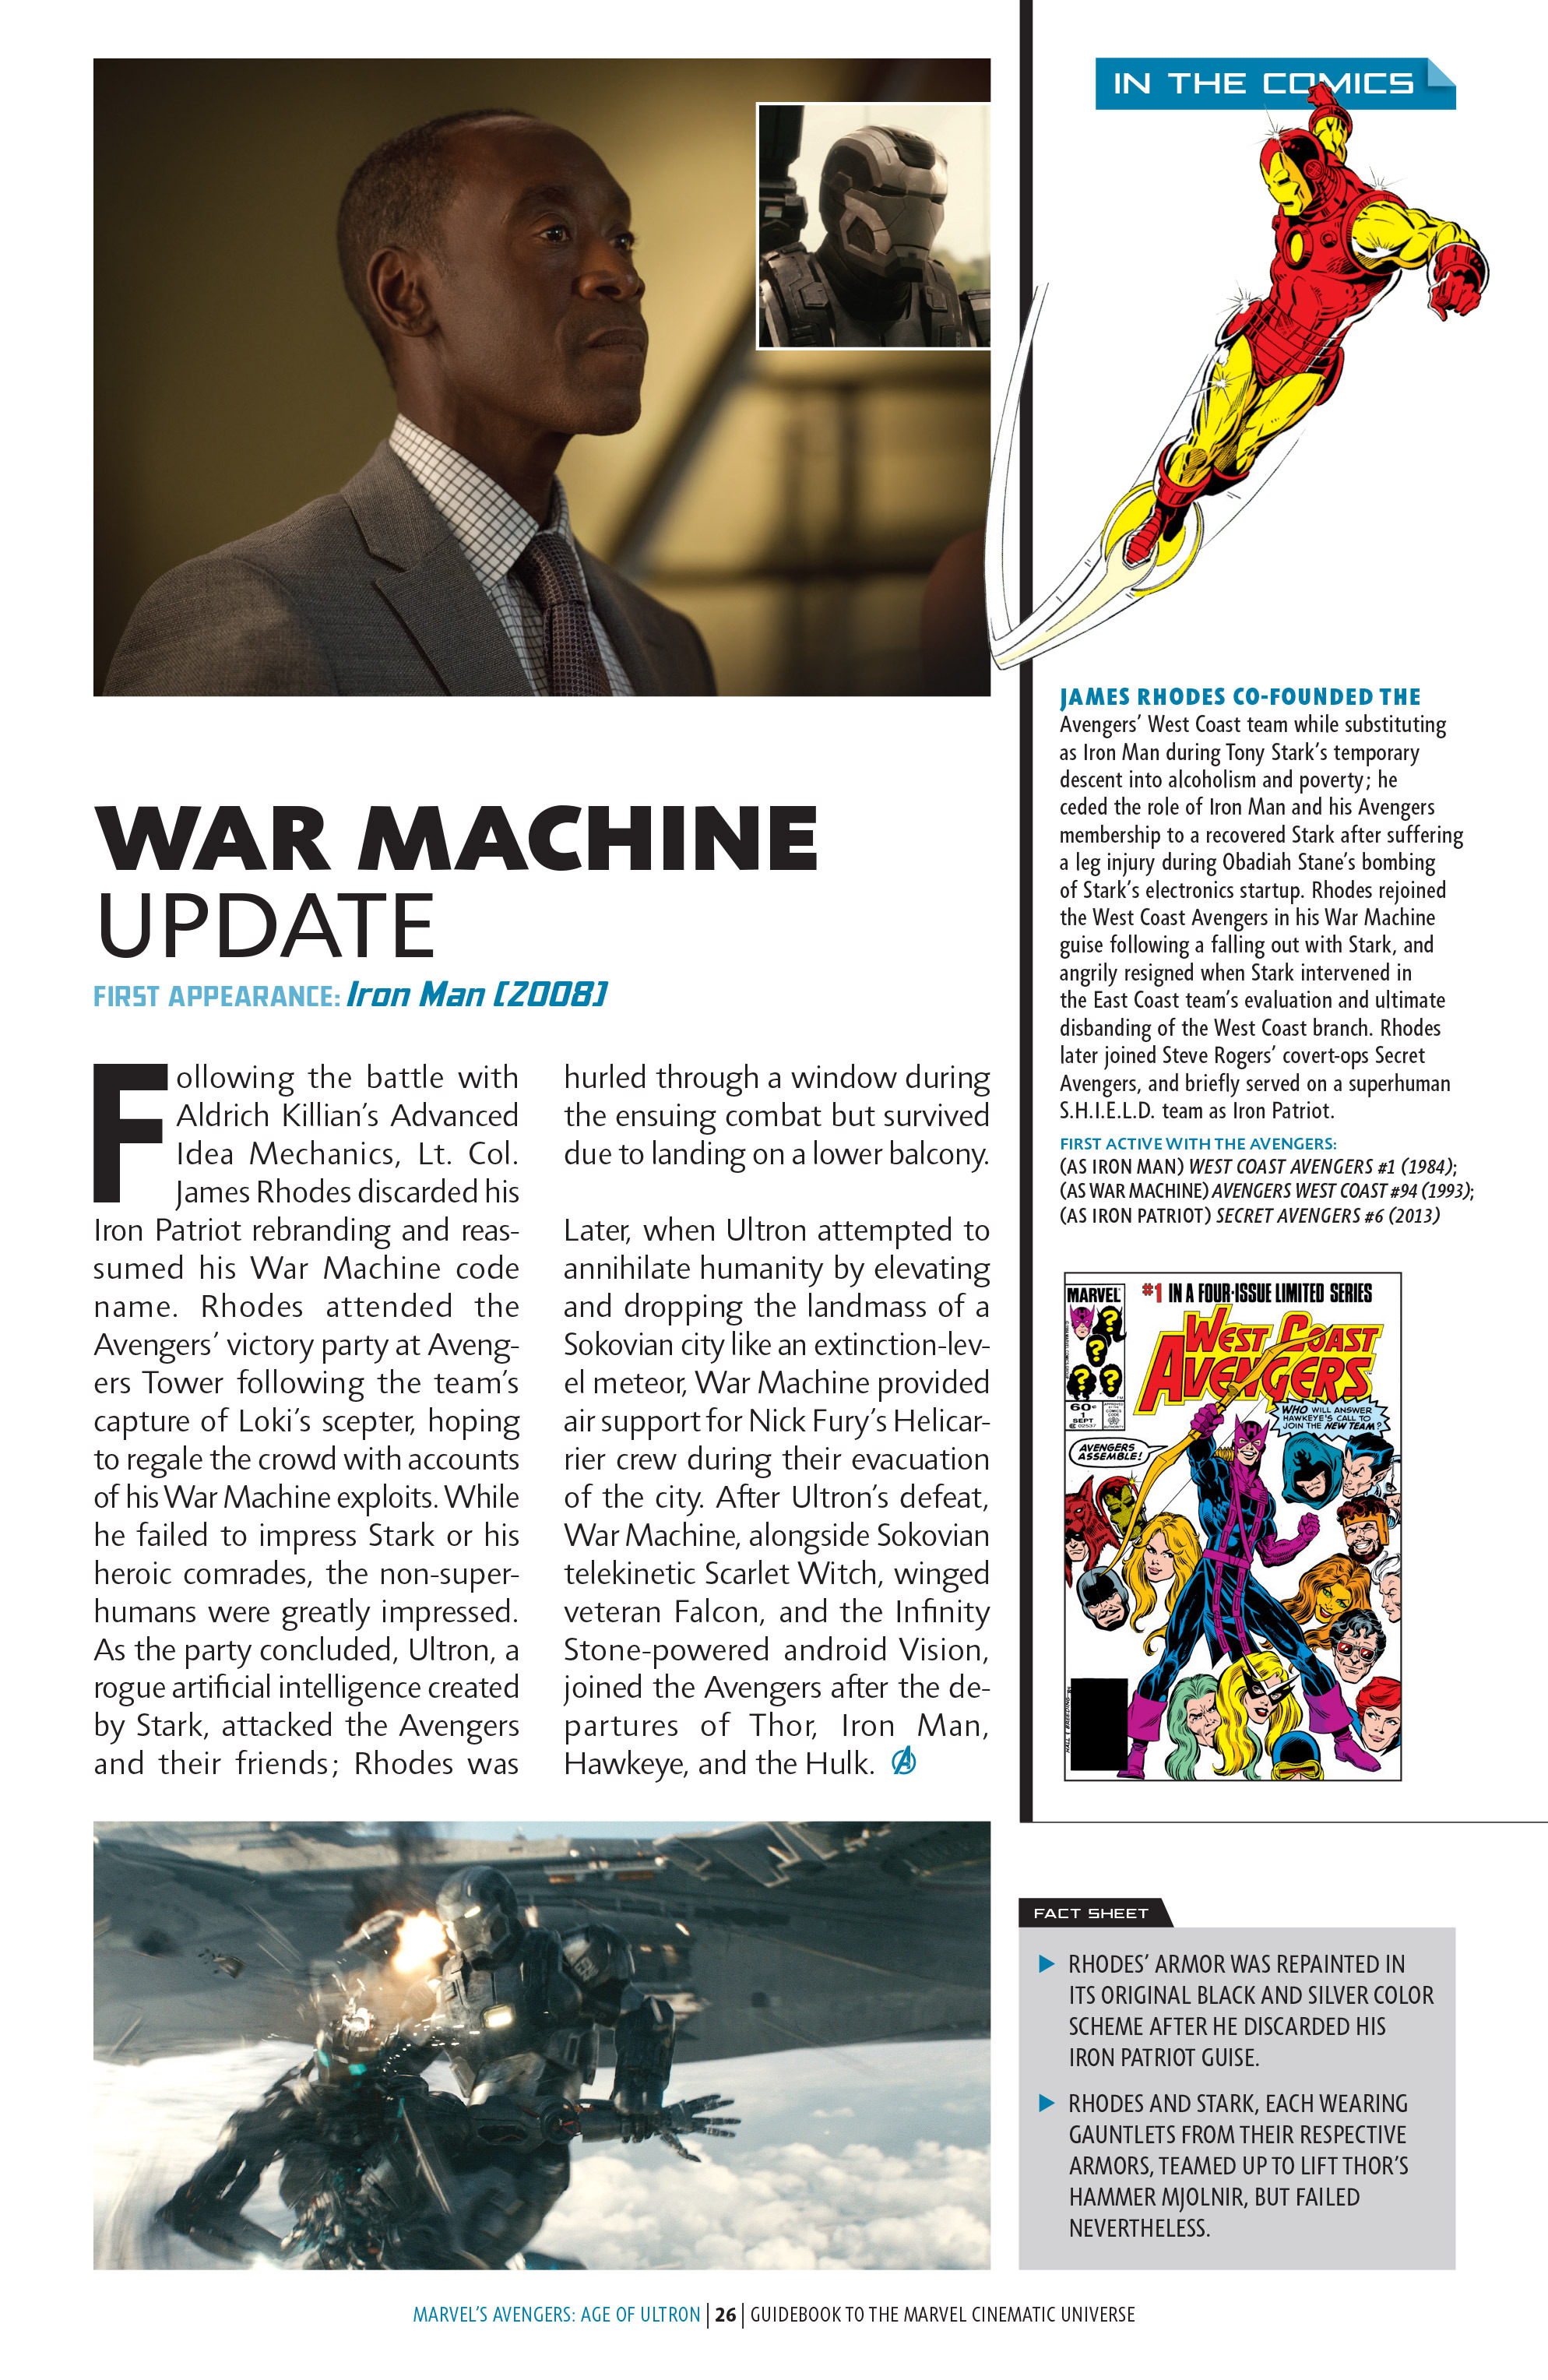 Read online Guidebook To the Marvel Cinematic Universe – Marvel's Avengers: Age of Ultron comic -  Issue # Full - 23